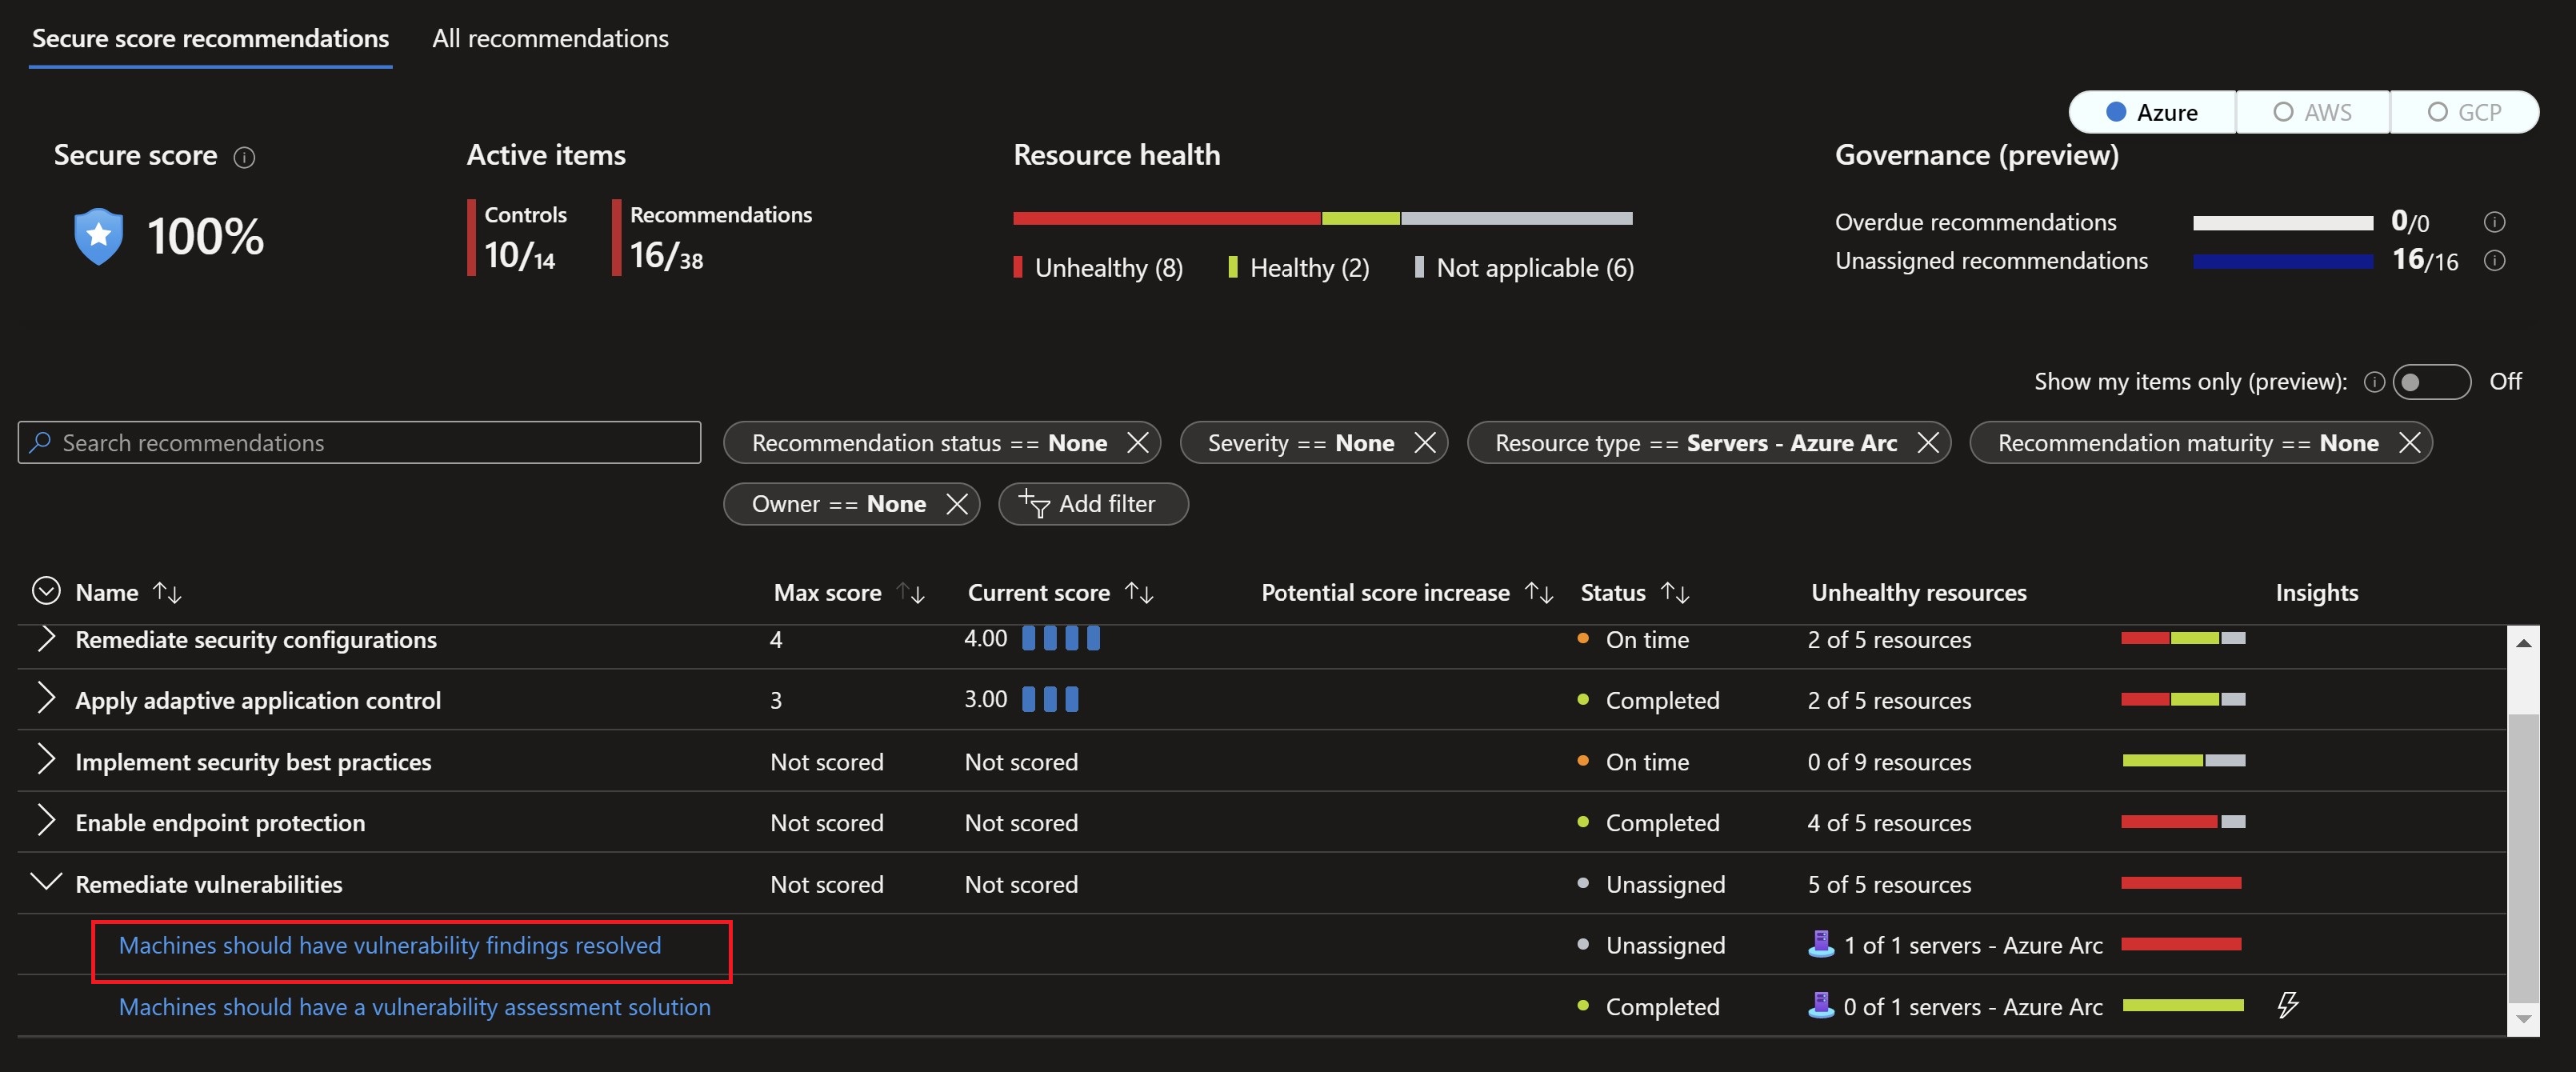 Screenshot showing the vulnrability assessment solution recommendation